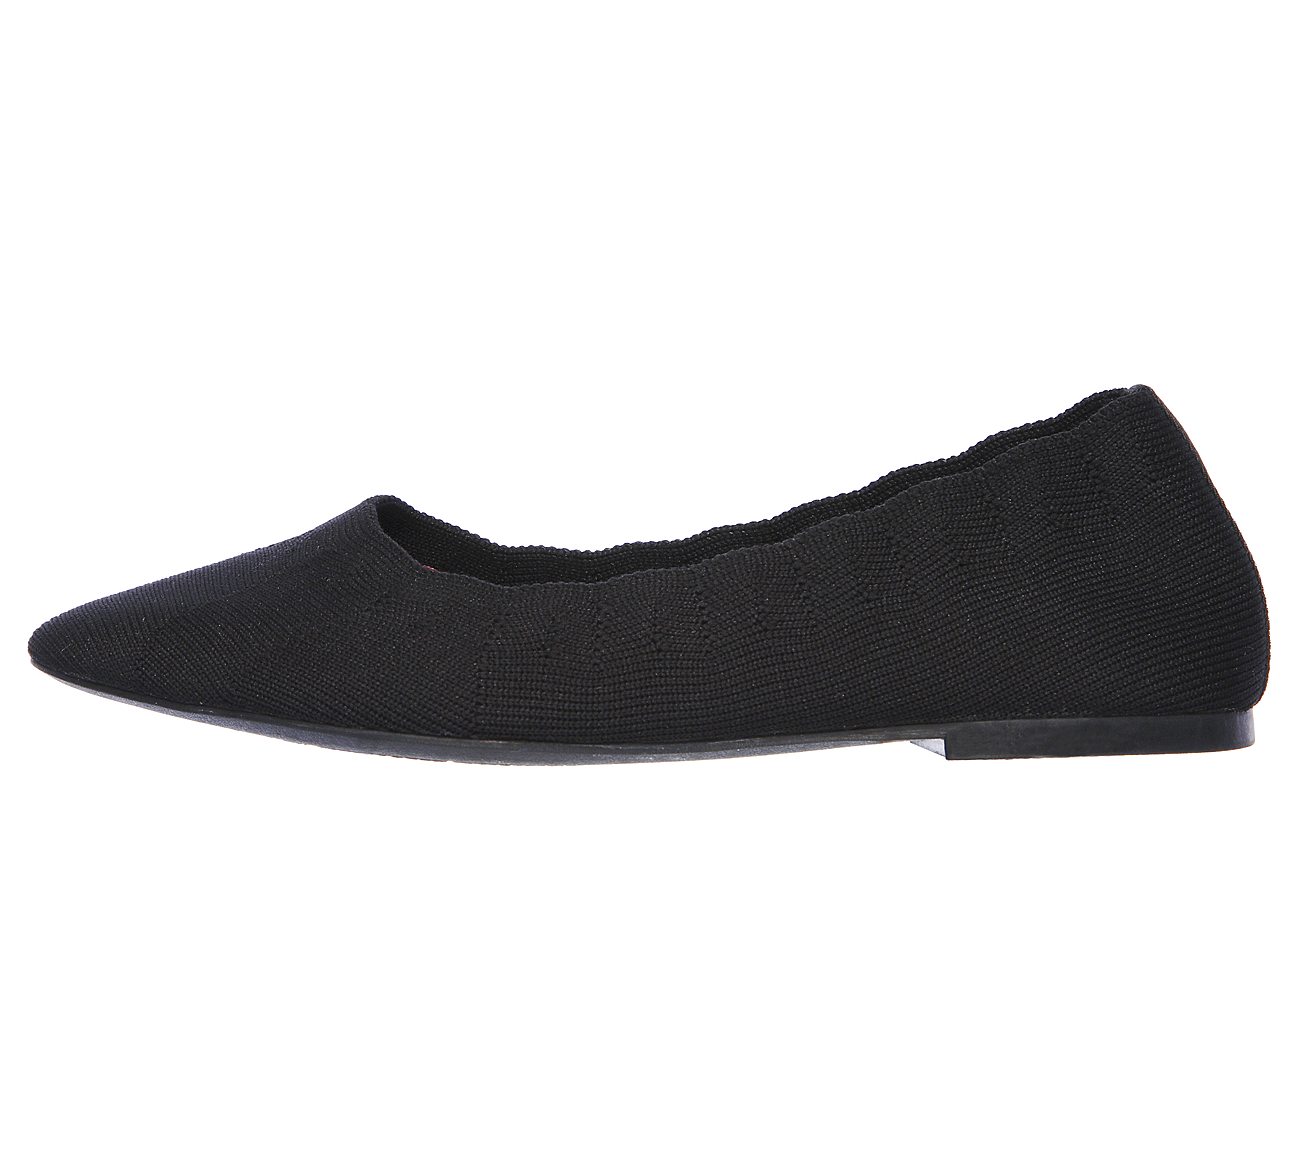 CLEO - BEWITCH, BBBBLACK Footwear Left View